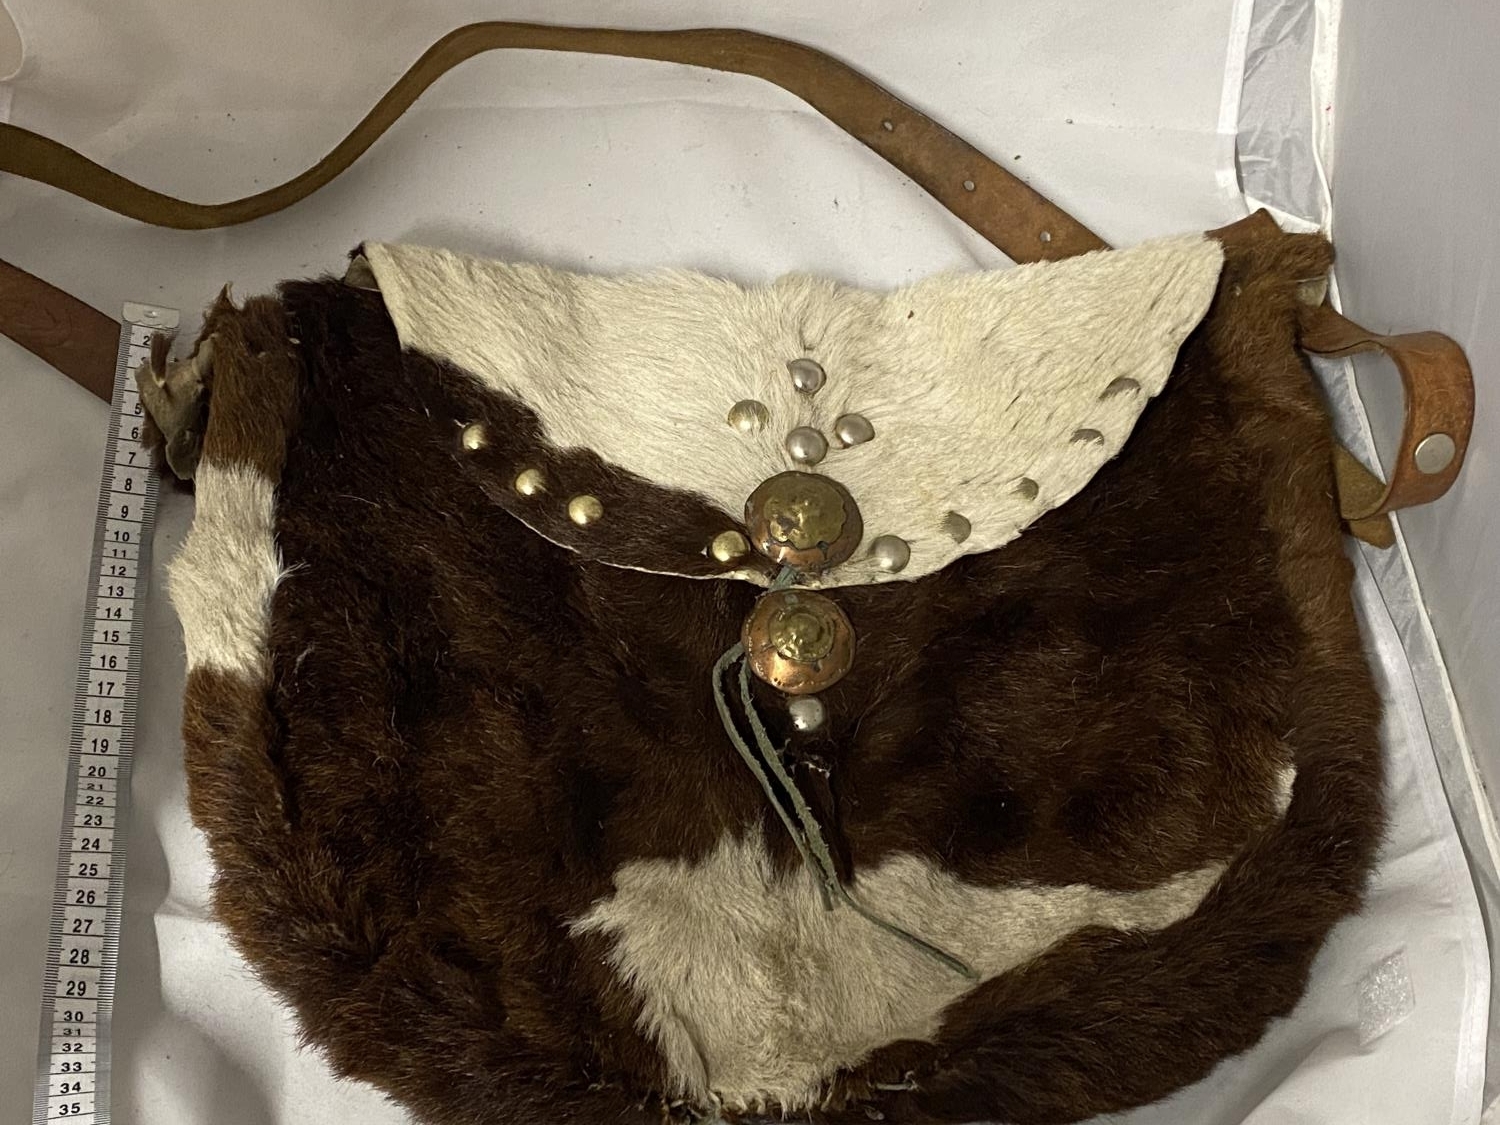 A vintage native Indian style hand sewn hunting shoulder bag made from animal hide